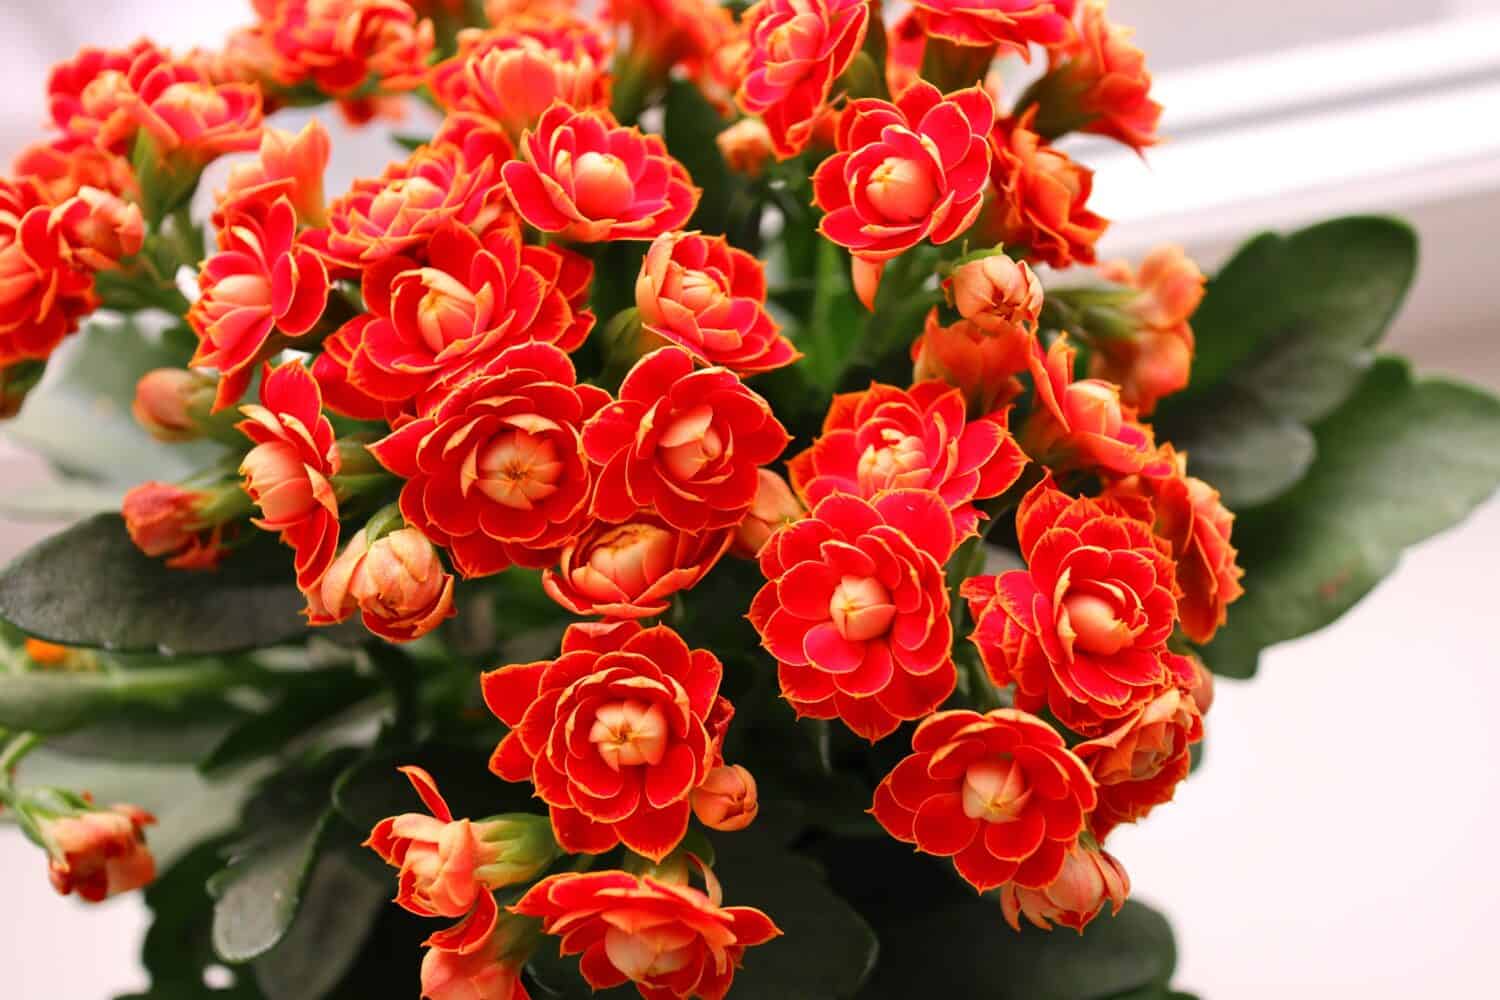 Blooming Kalanchoe close-up. Red flowers of Kalanchoe. Home flowers                             